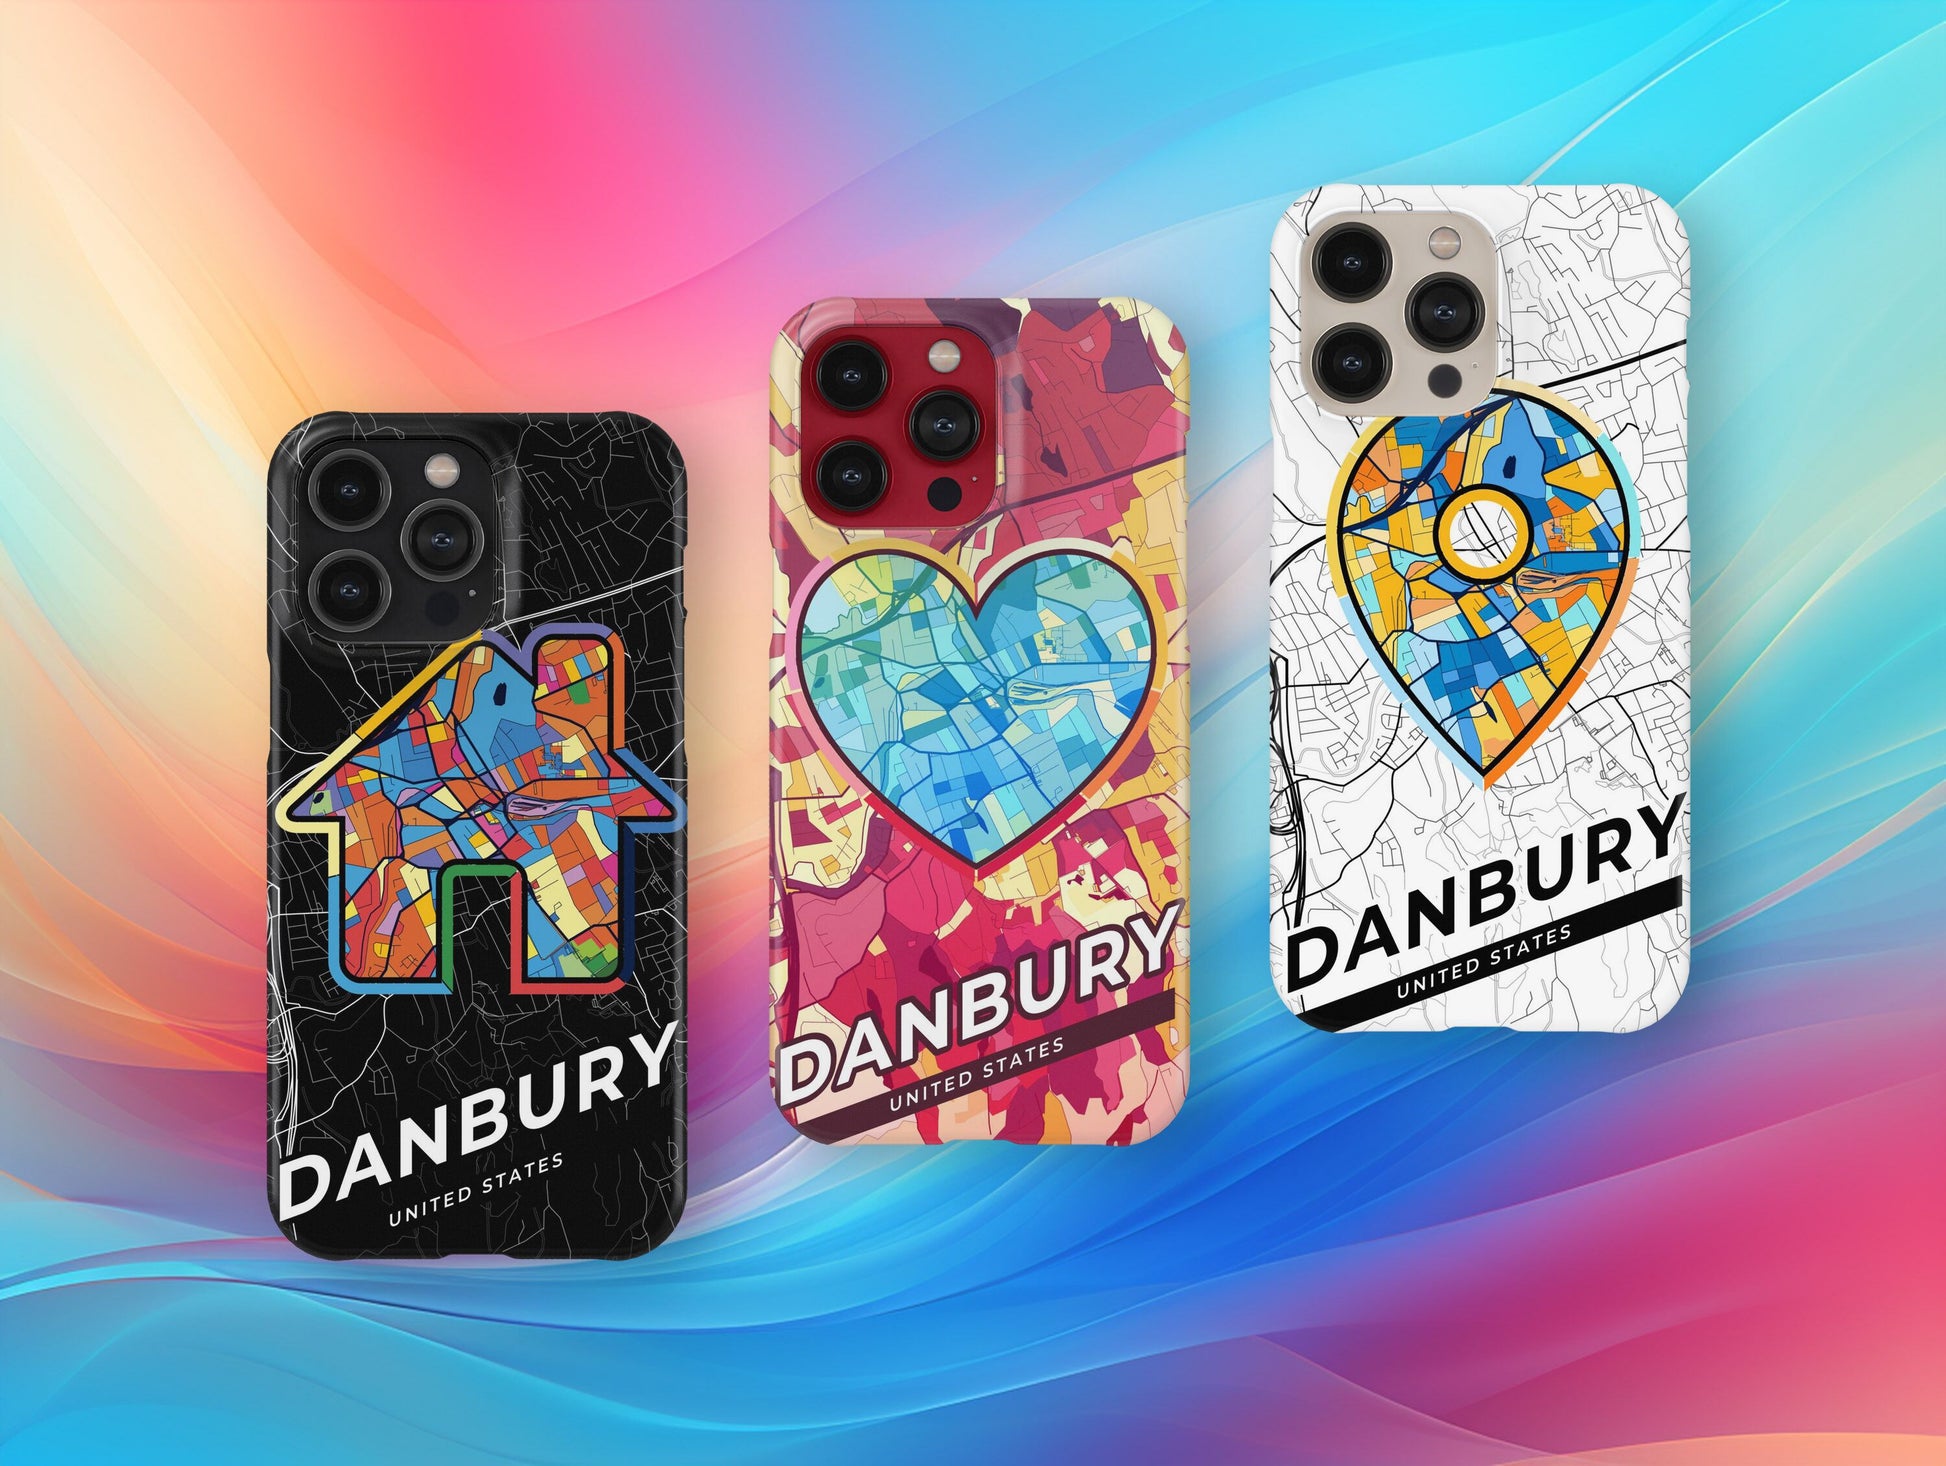 Danbury Connecticut slim phone case with colorful icon. Birthday, wedding or housewarming gift. Couple match cases.